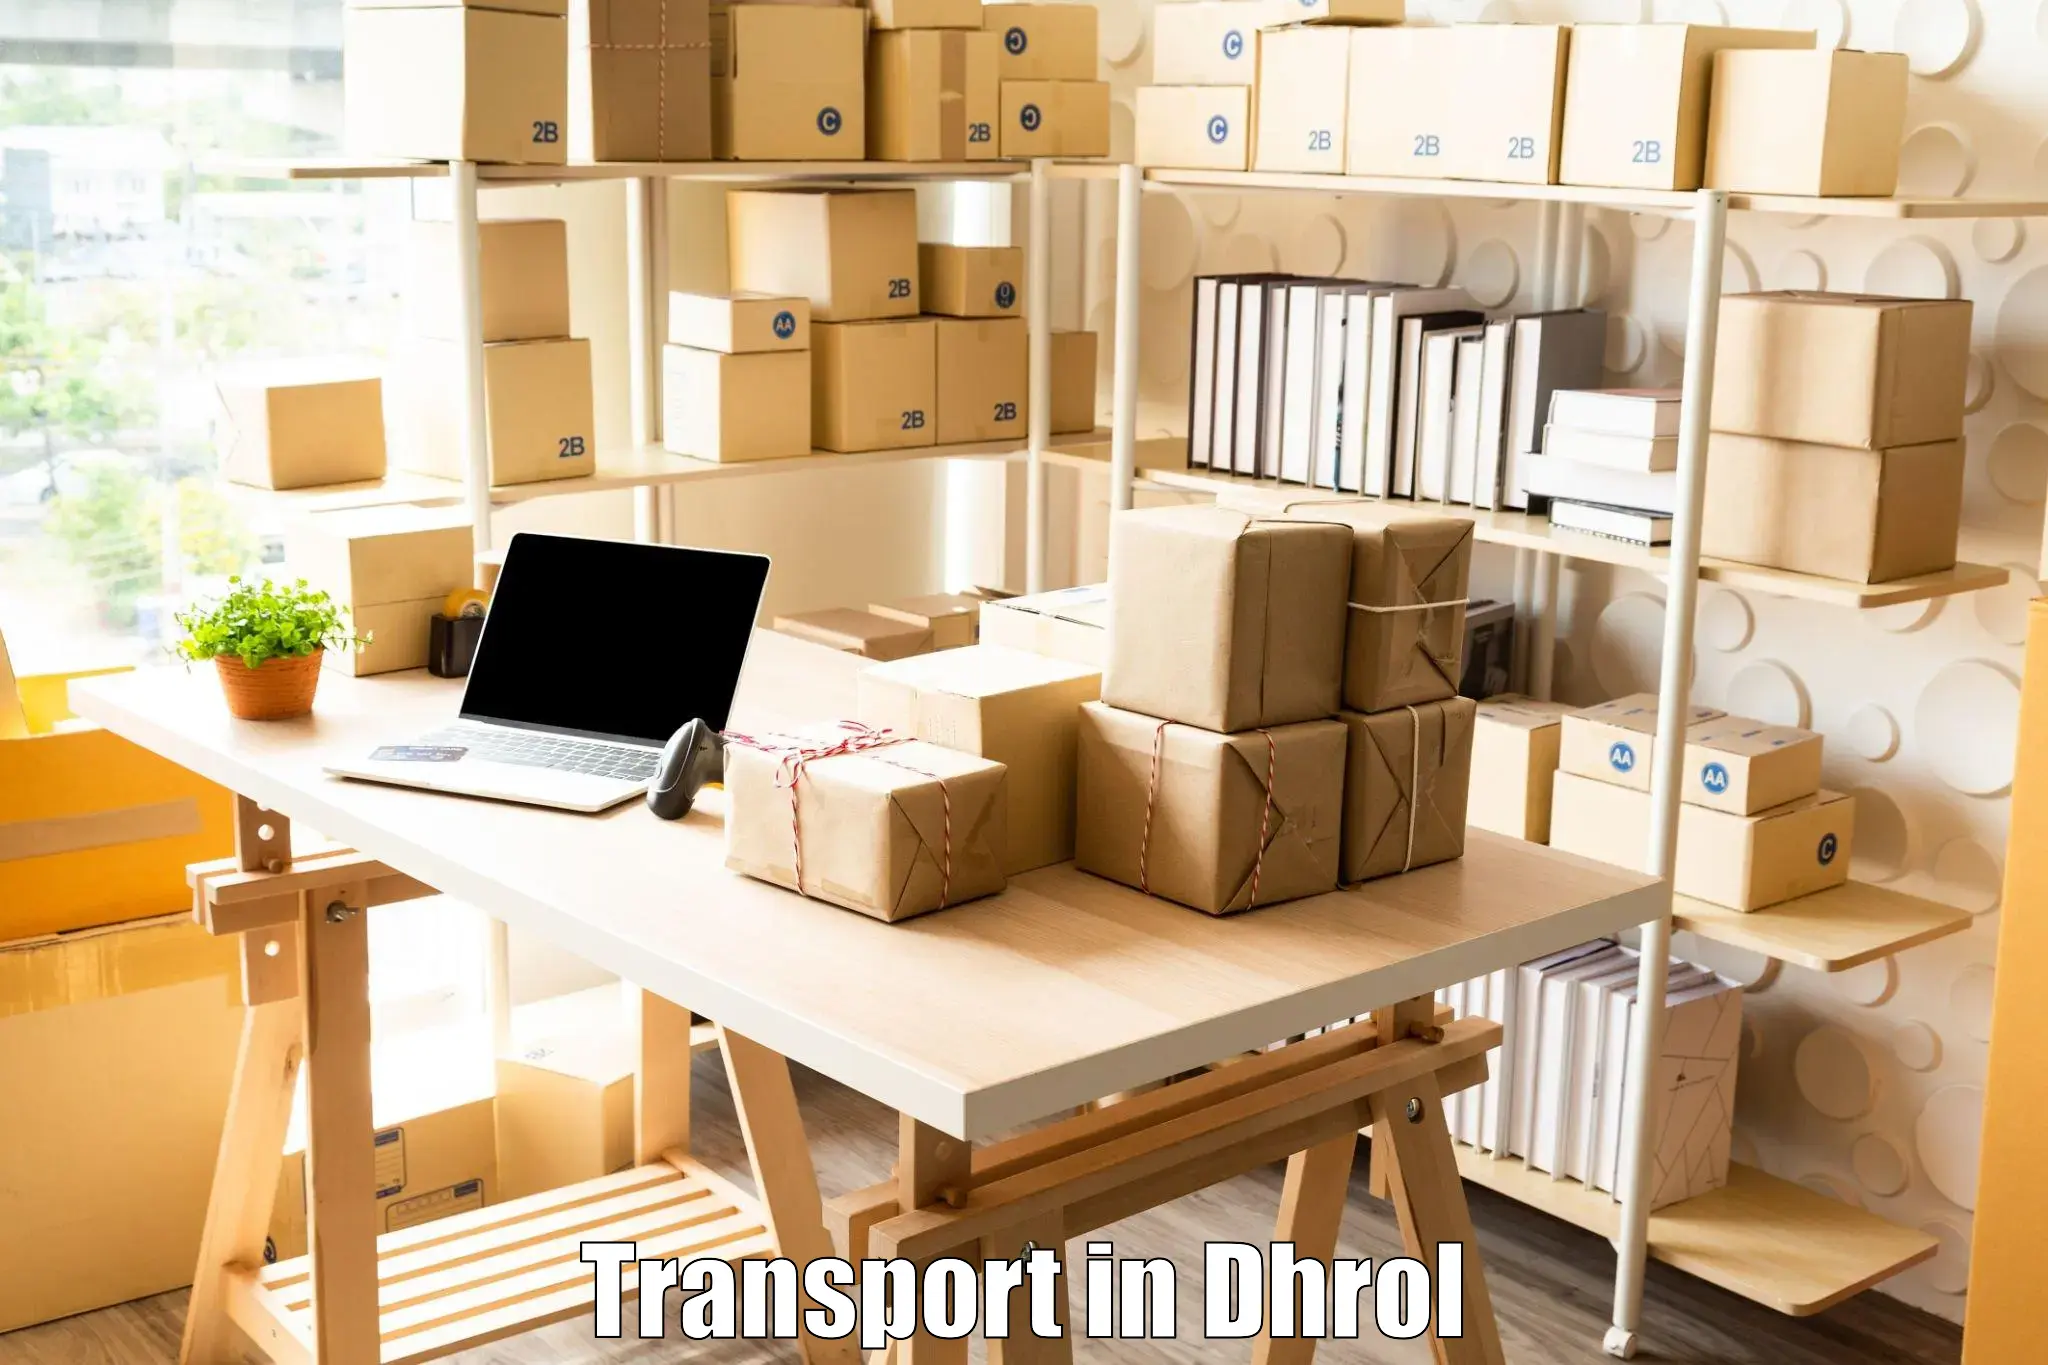 Container transport service in Dhrol